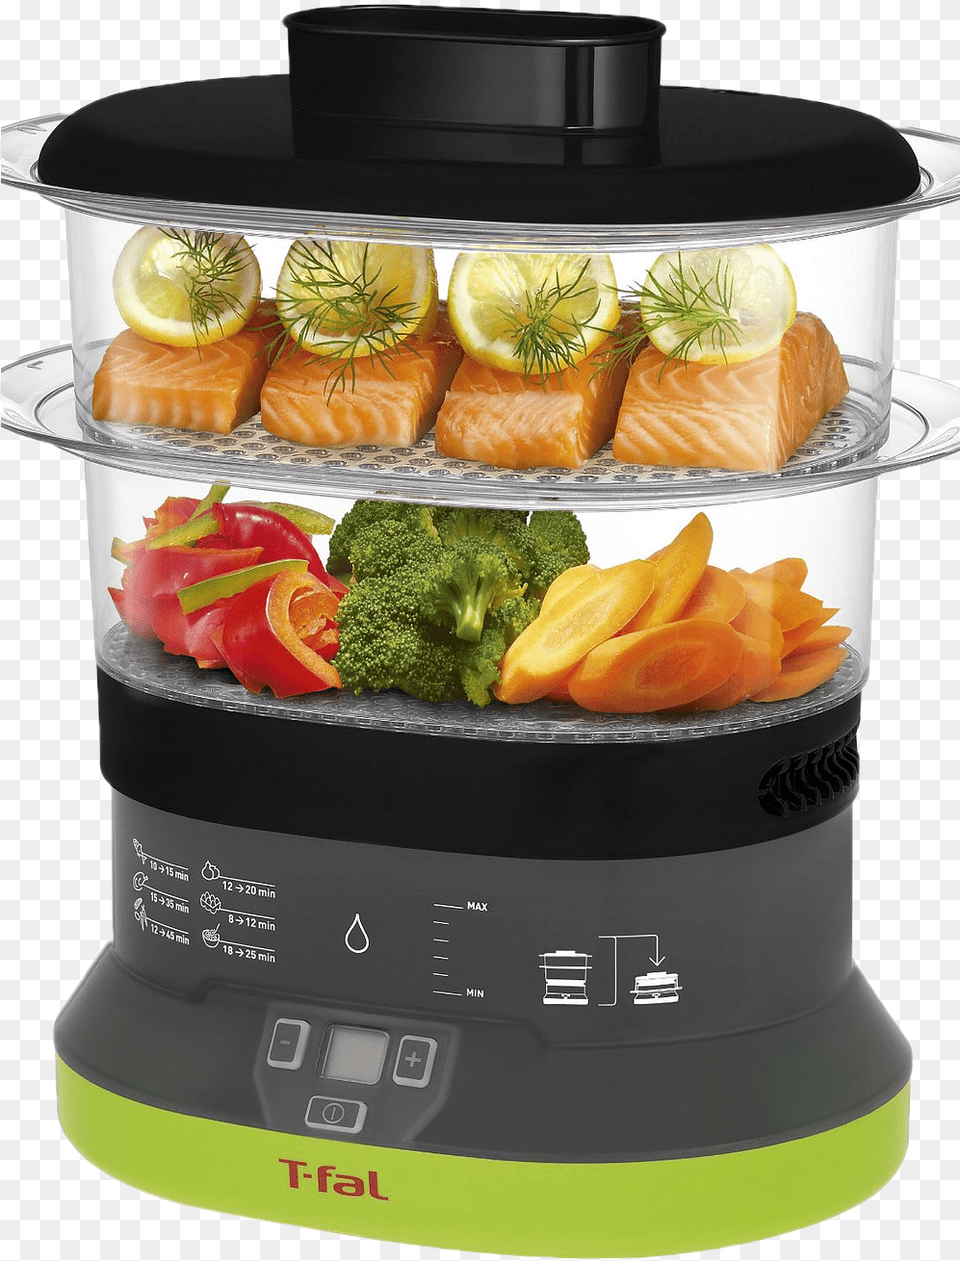 Best Food Steamer, Appliance, Cooker, Device, Electrical Device Png